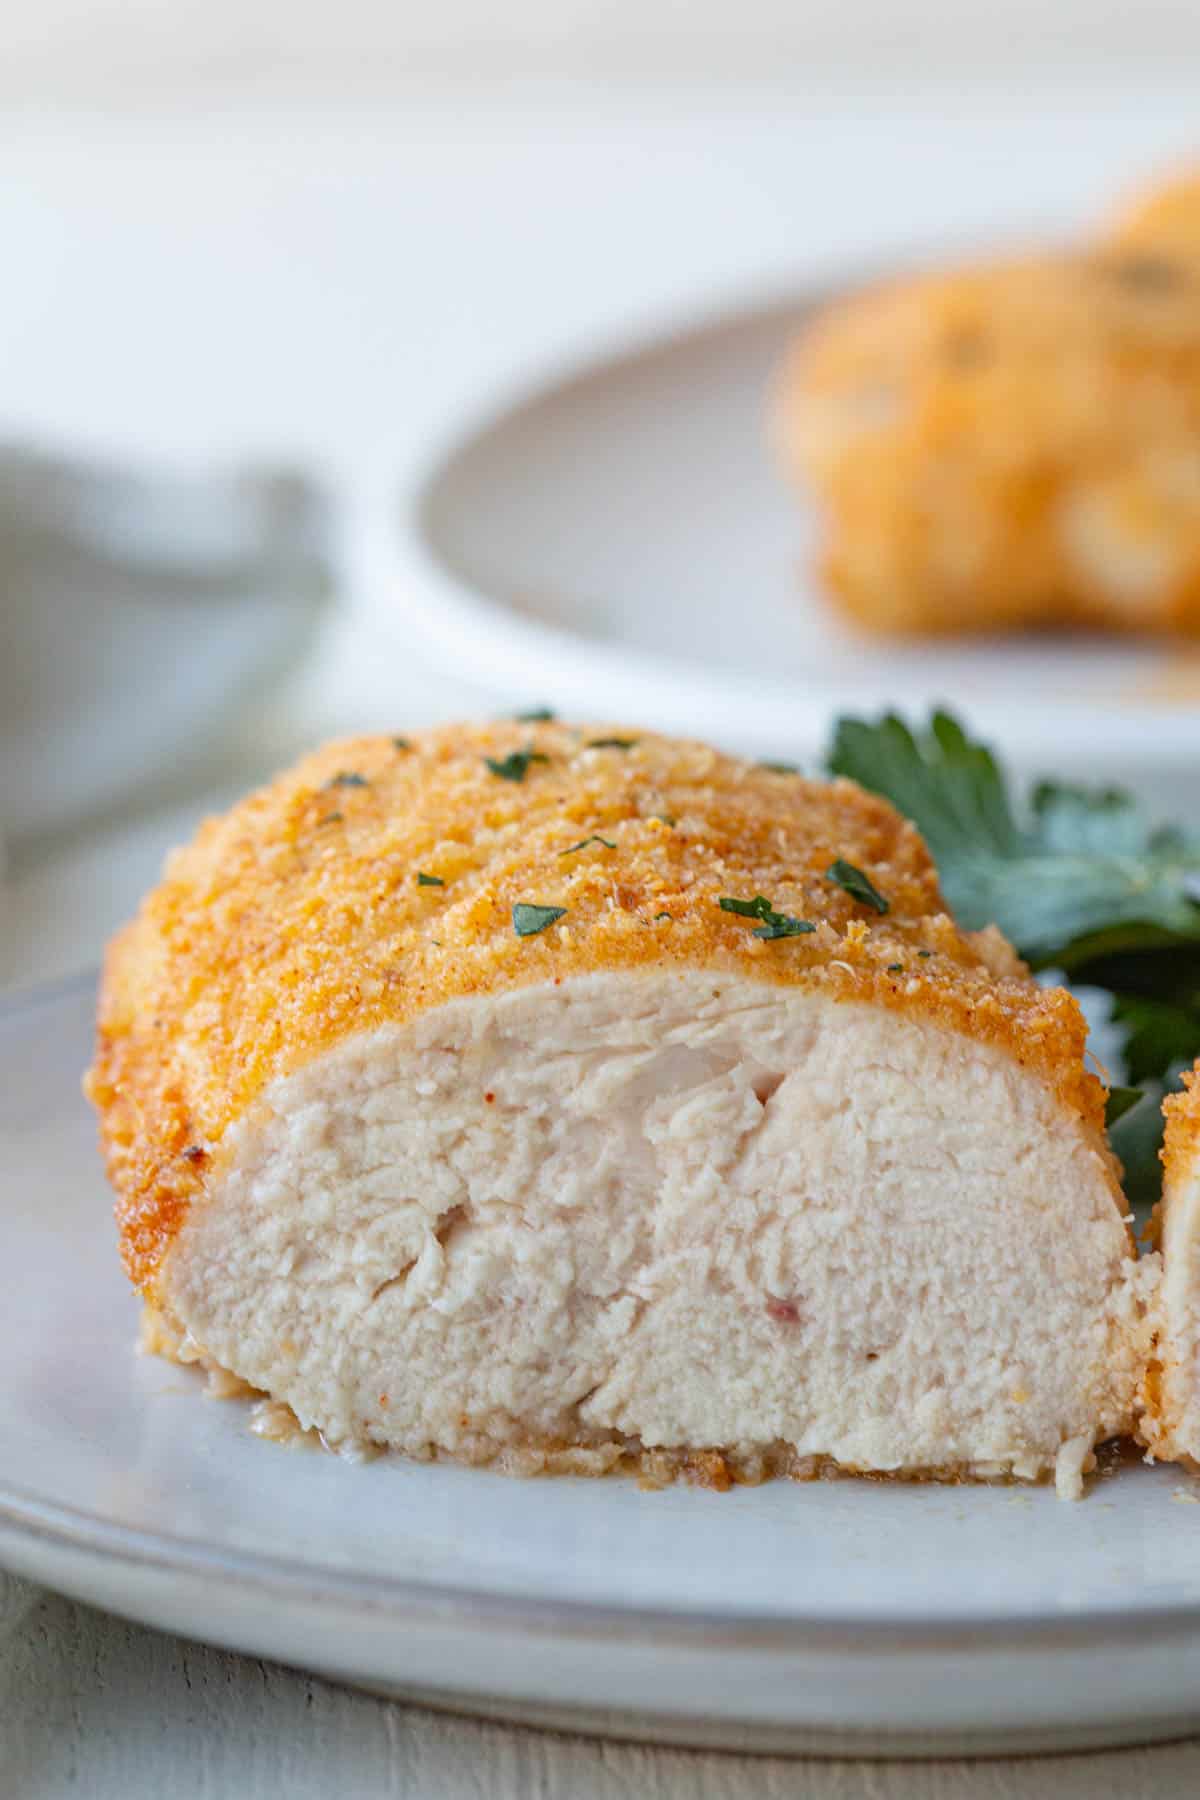 the interior of a baked parmesan chicken breast on a white plate.